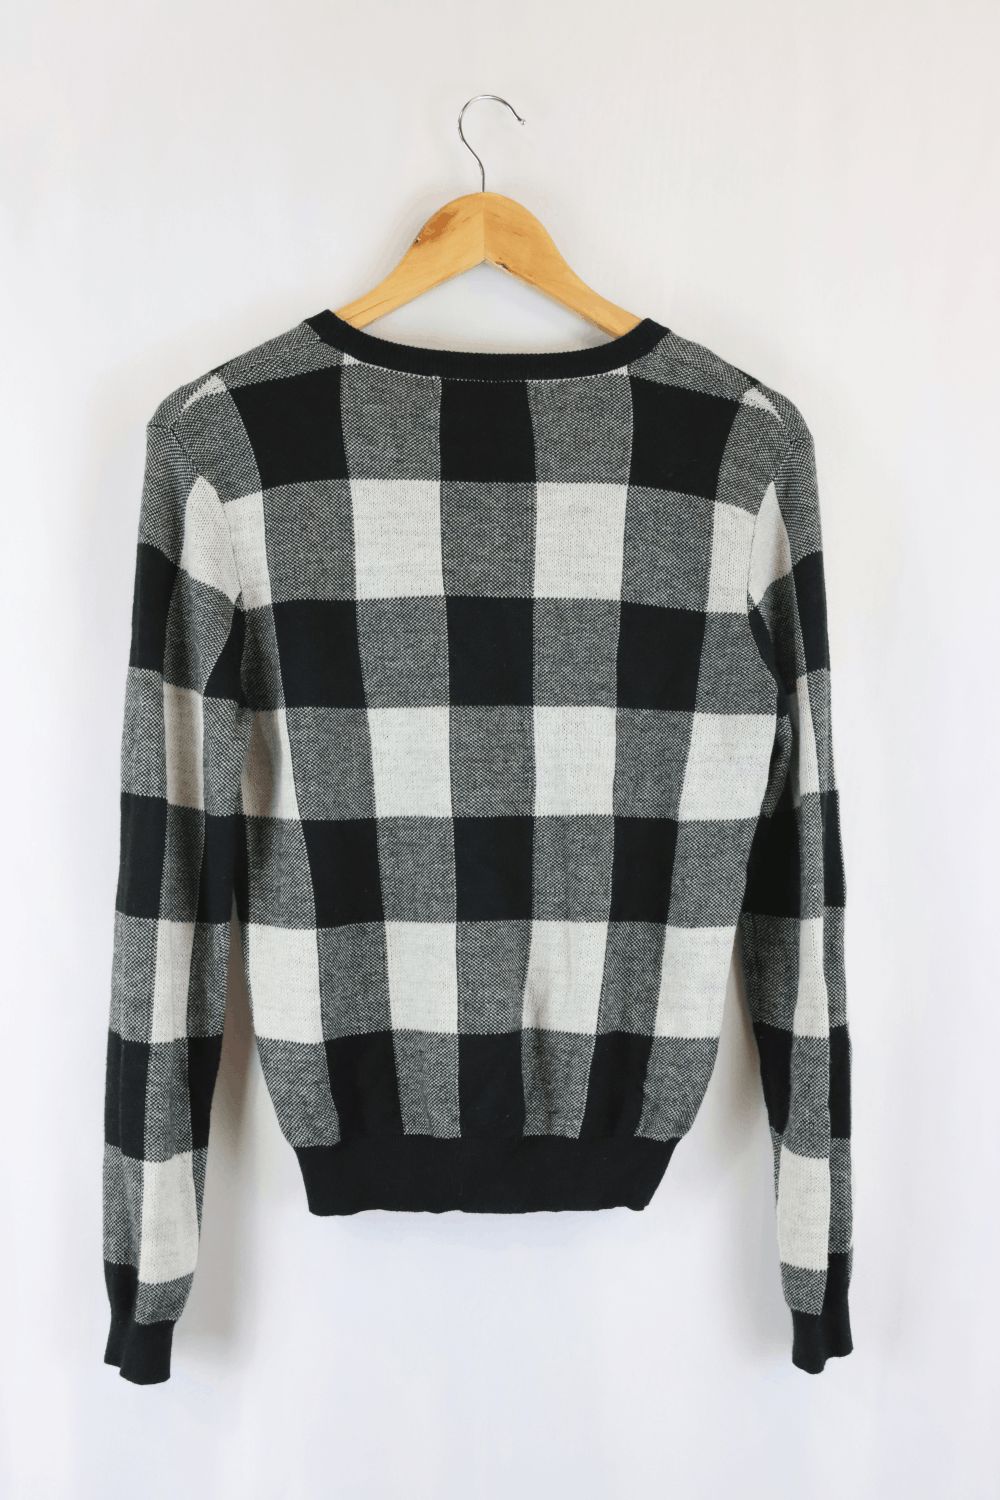 Dangerfield Black And White Knit 10